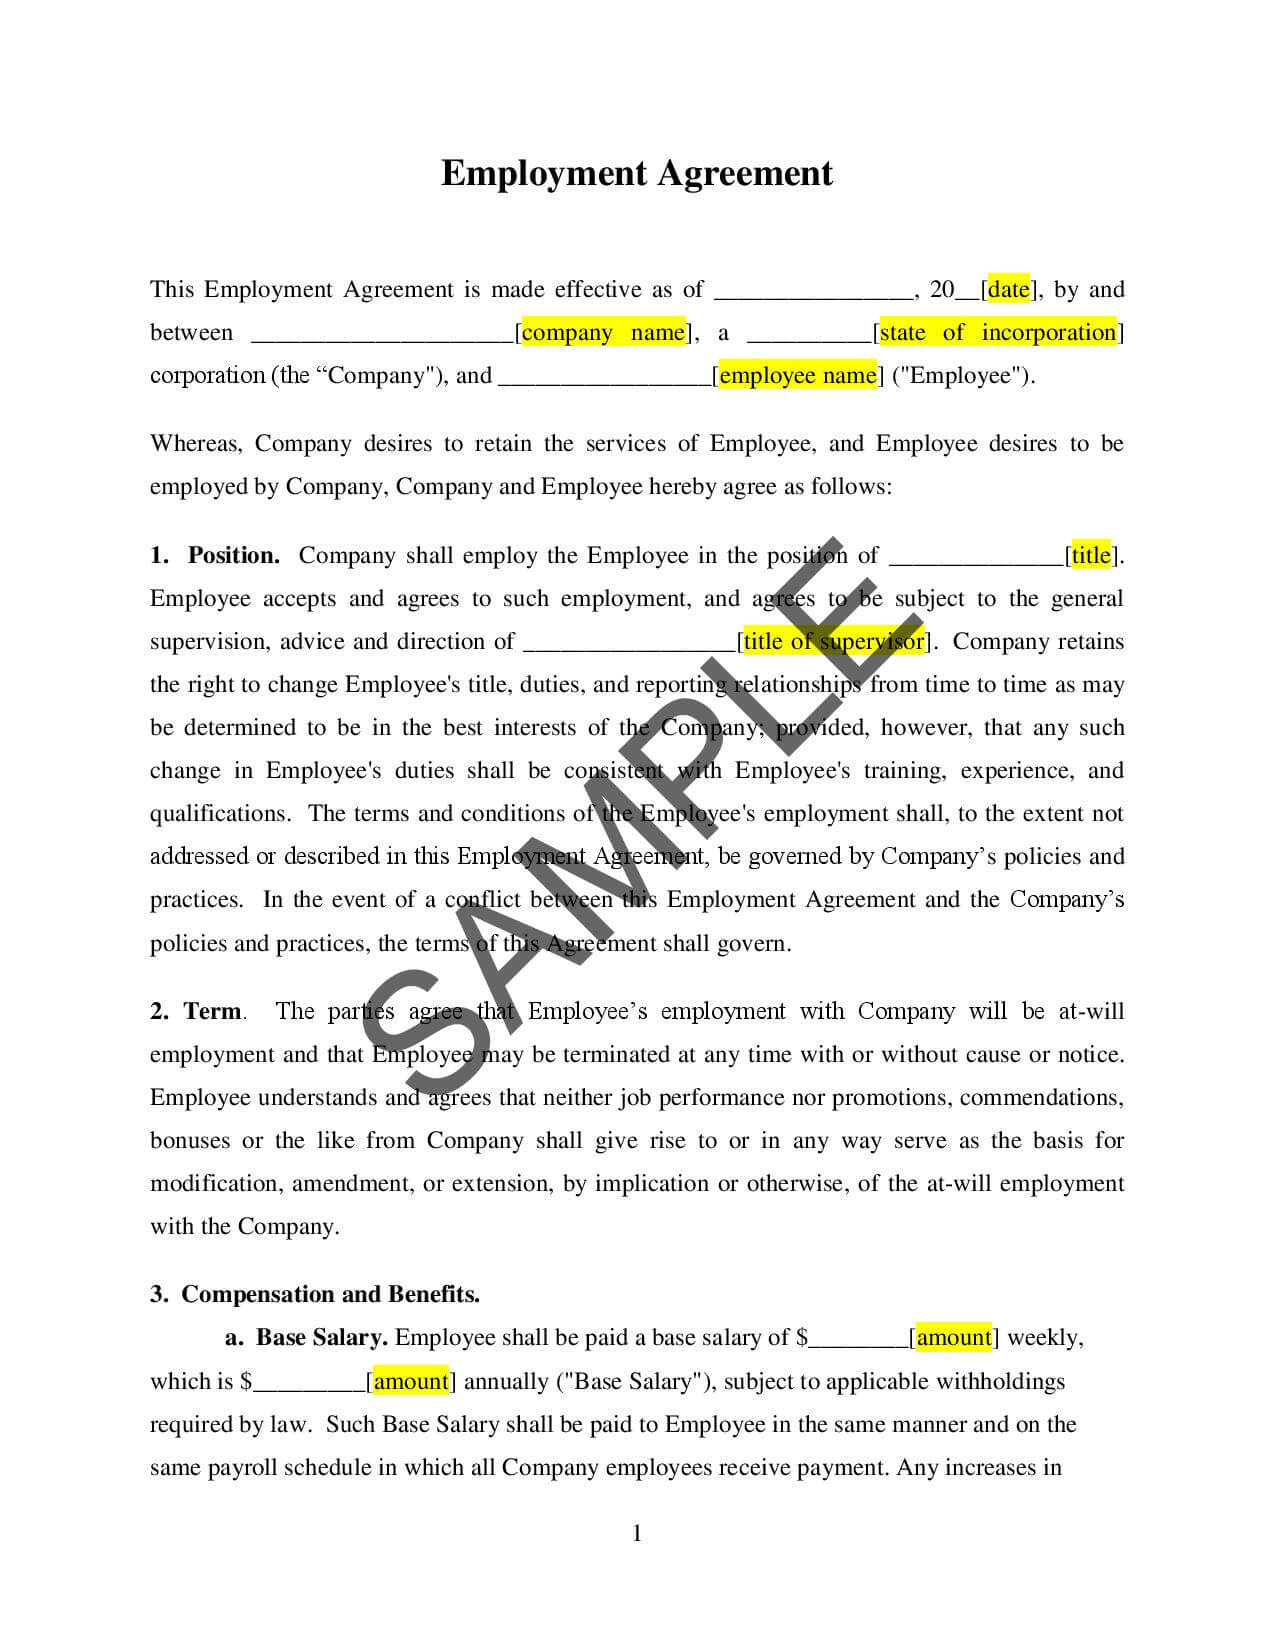 Agreement With Employee Employment Contract For At Will Employees